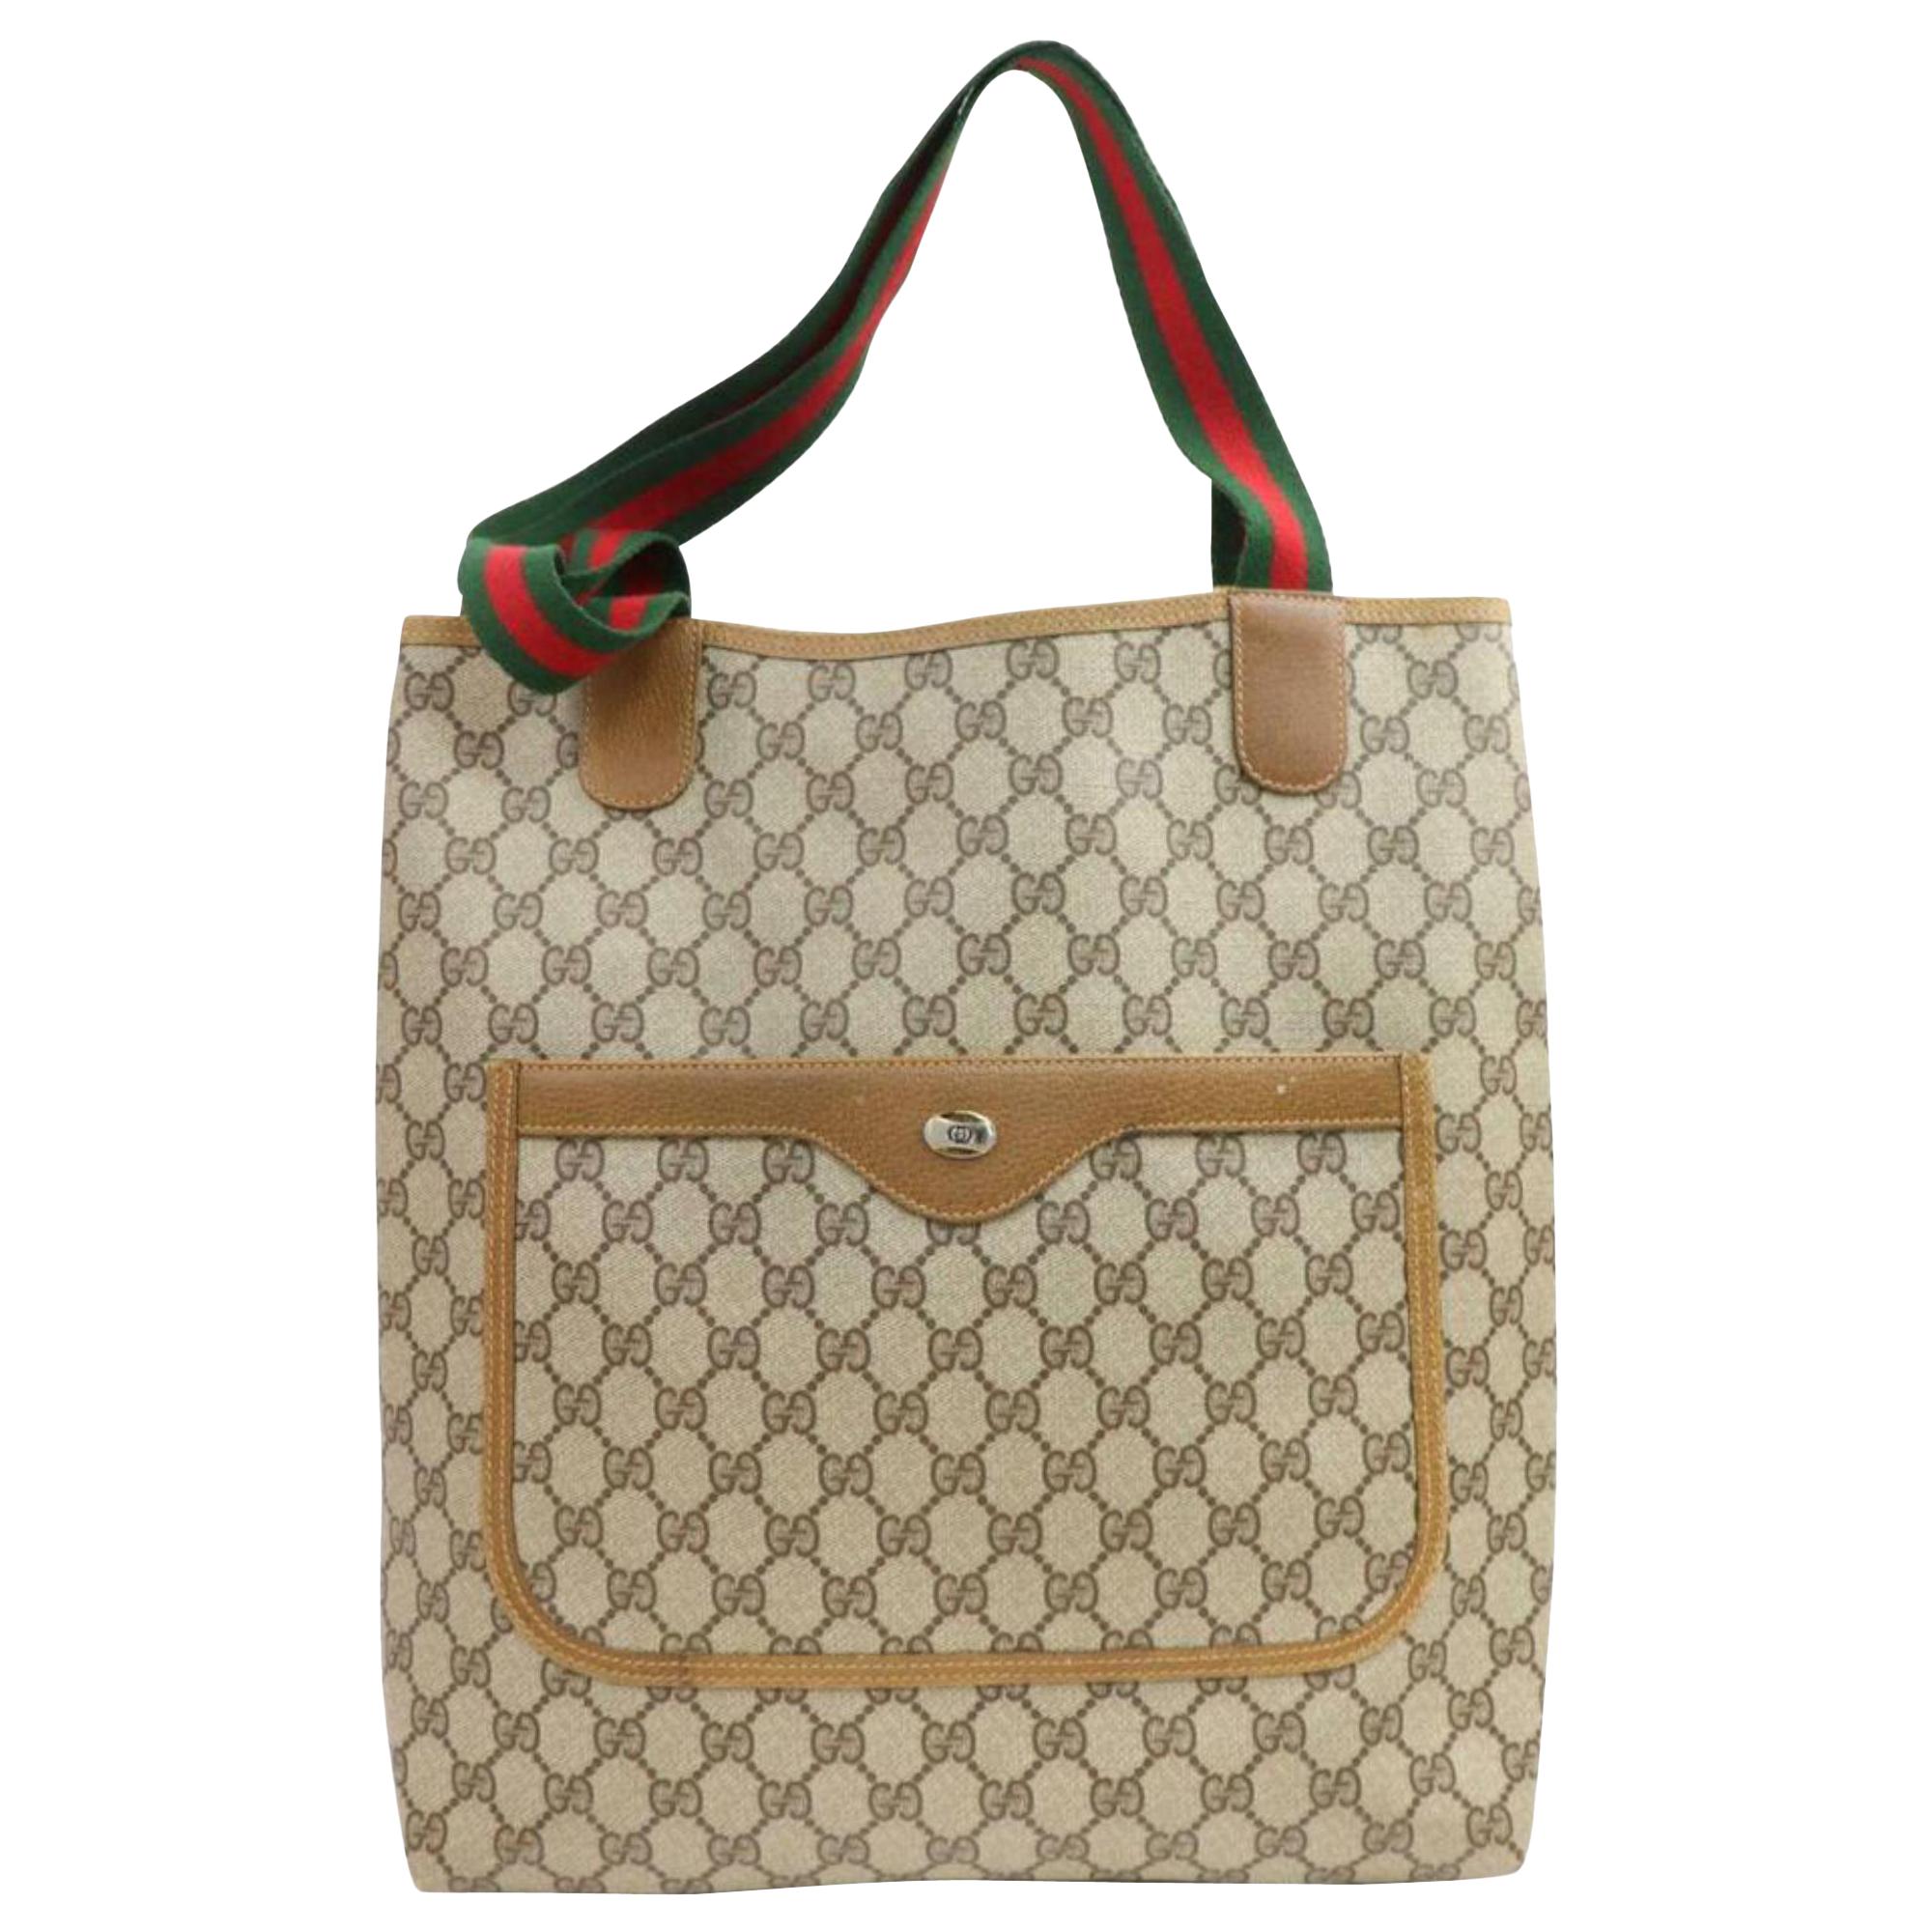 Gucci Shoulder Bag Shopping Sherry Web 870645 Beige Gg Supreme Canvas Tote For Sale